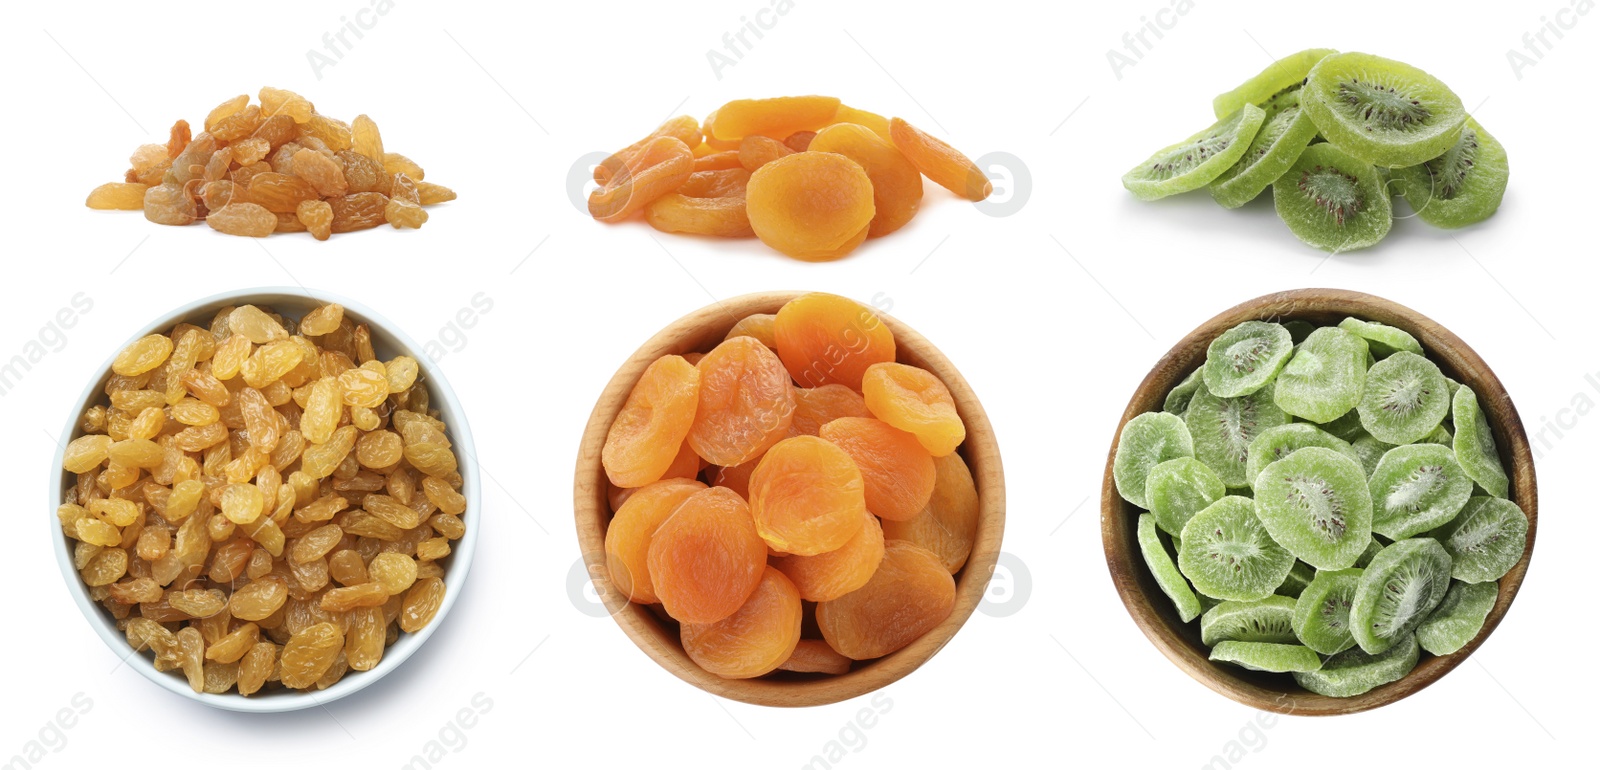 Image of Set of different dry fruits on white background